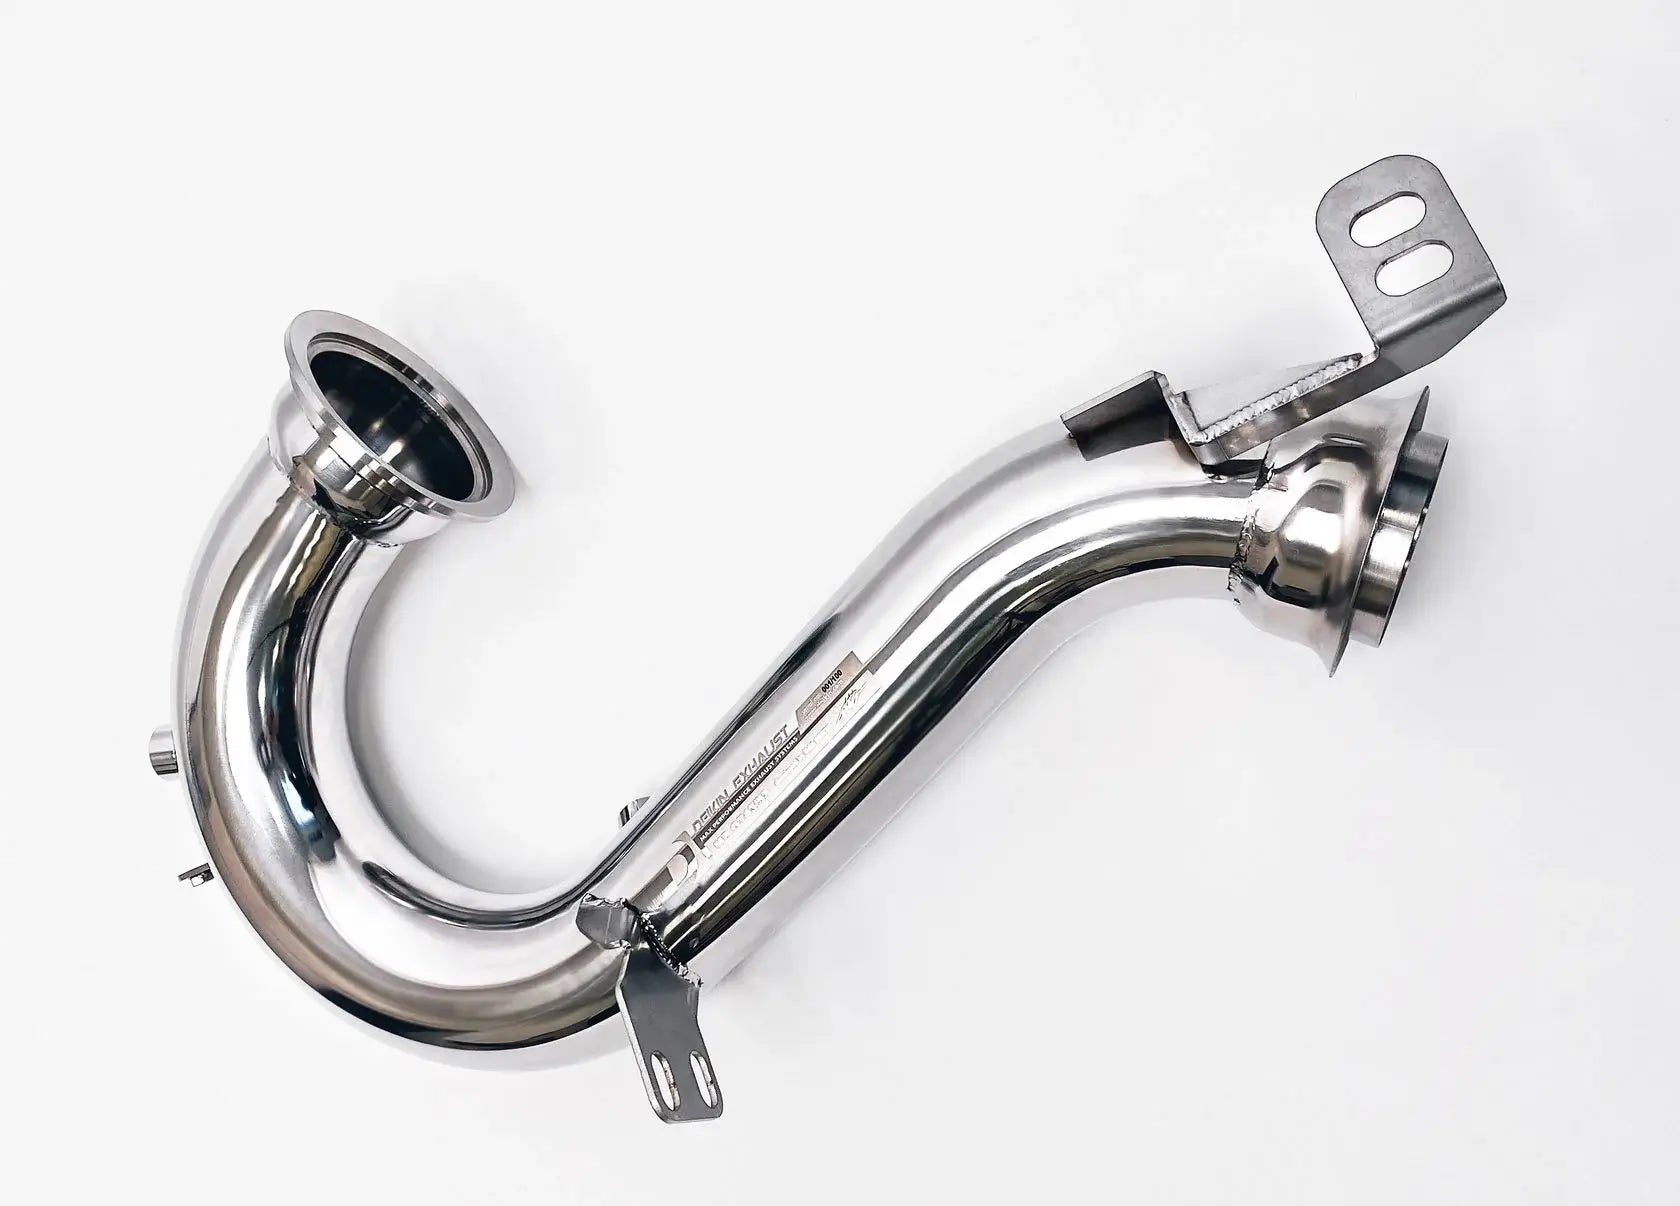 DEIKIN 10-MB.GT43.X290-DP Downpipe for Mercedes-AMG GT43 (x290) without HeatShield Photo-0 